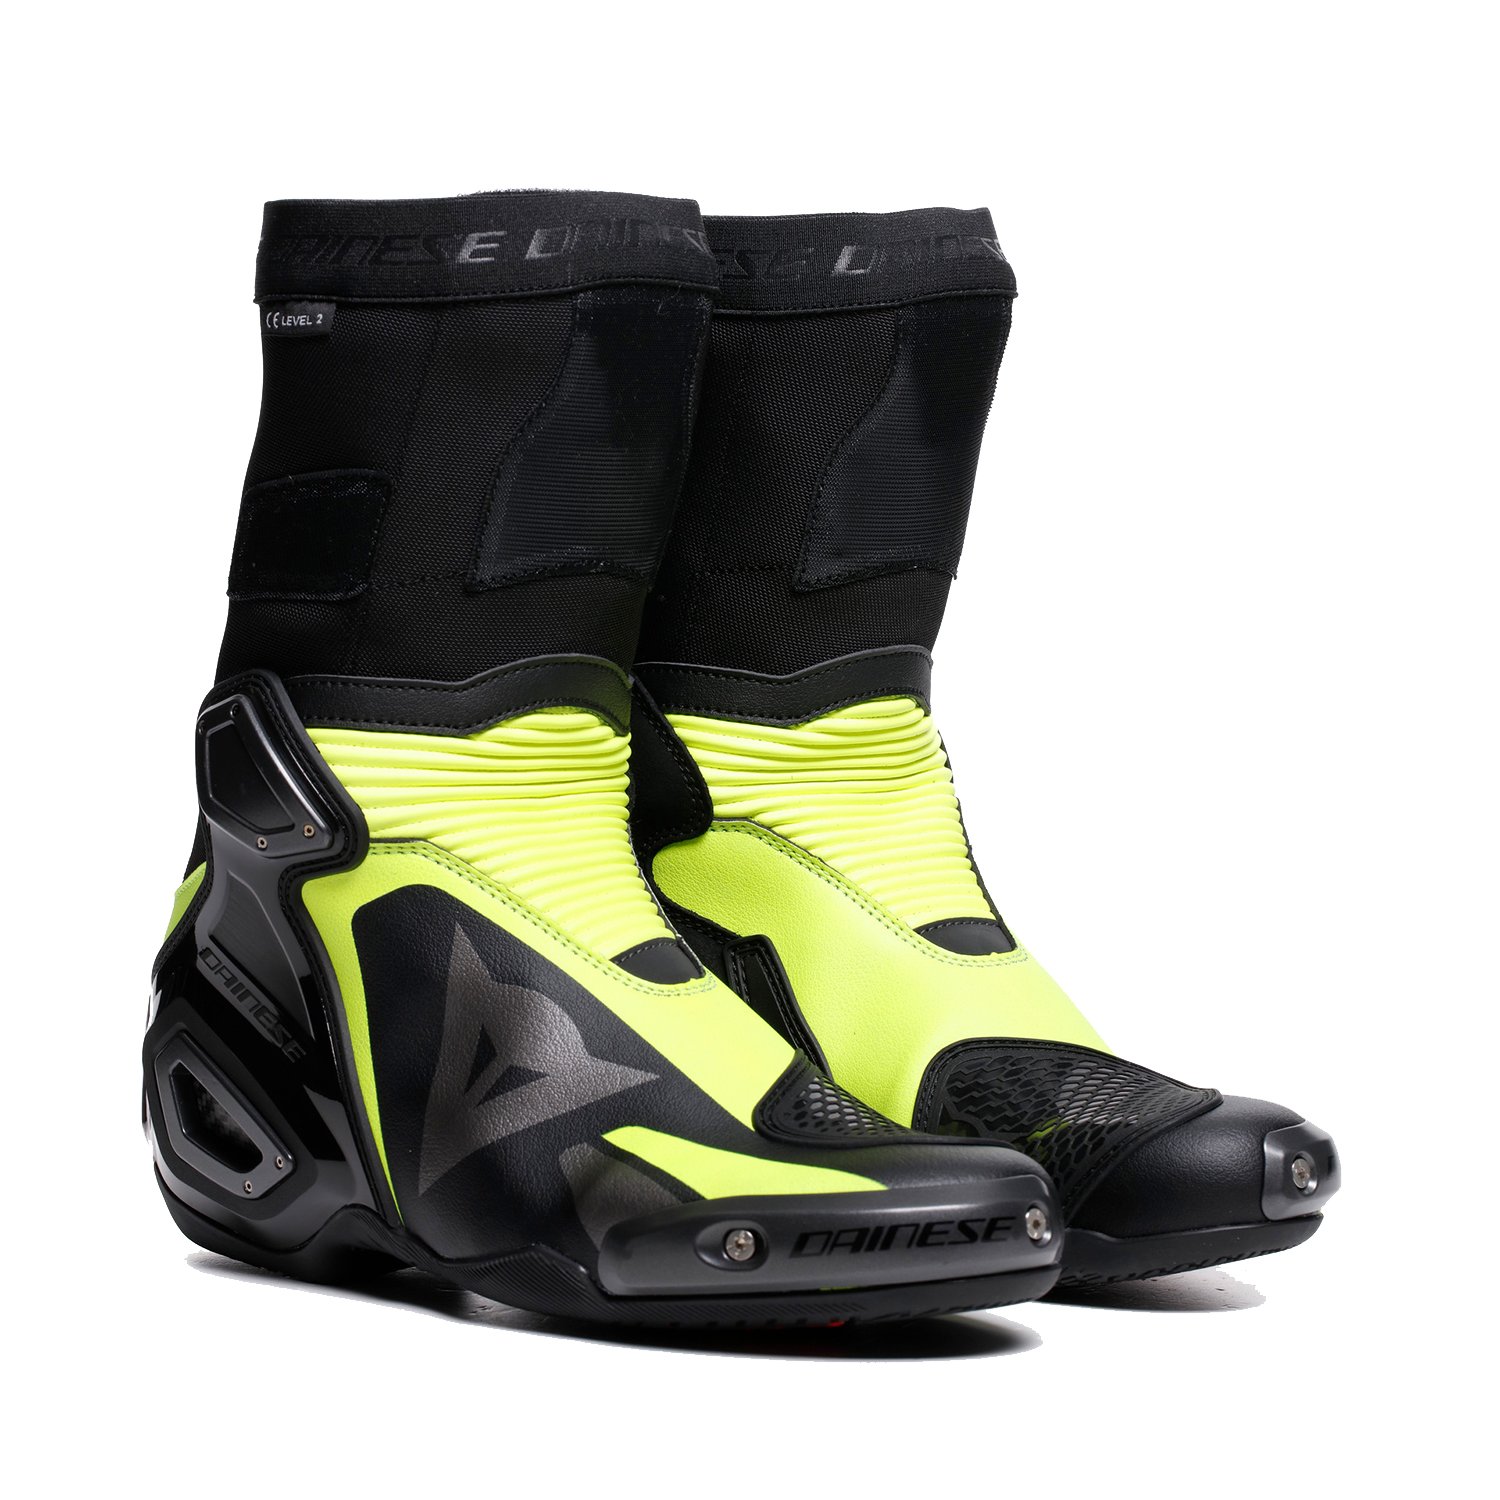 Image of Dainese Axial 2 Boots Black Yellow Fluo Größe 40